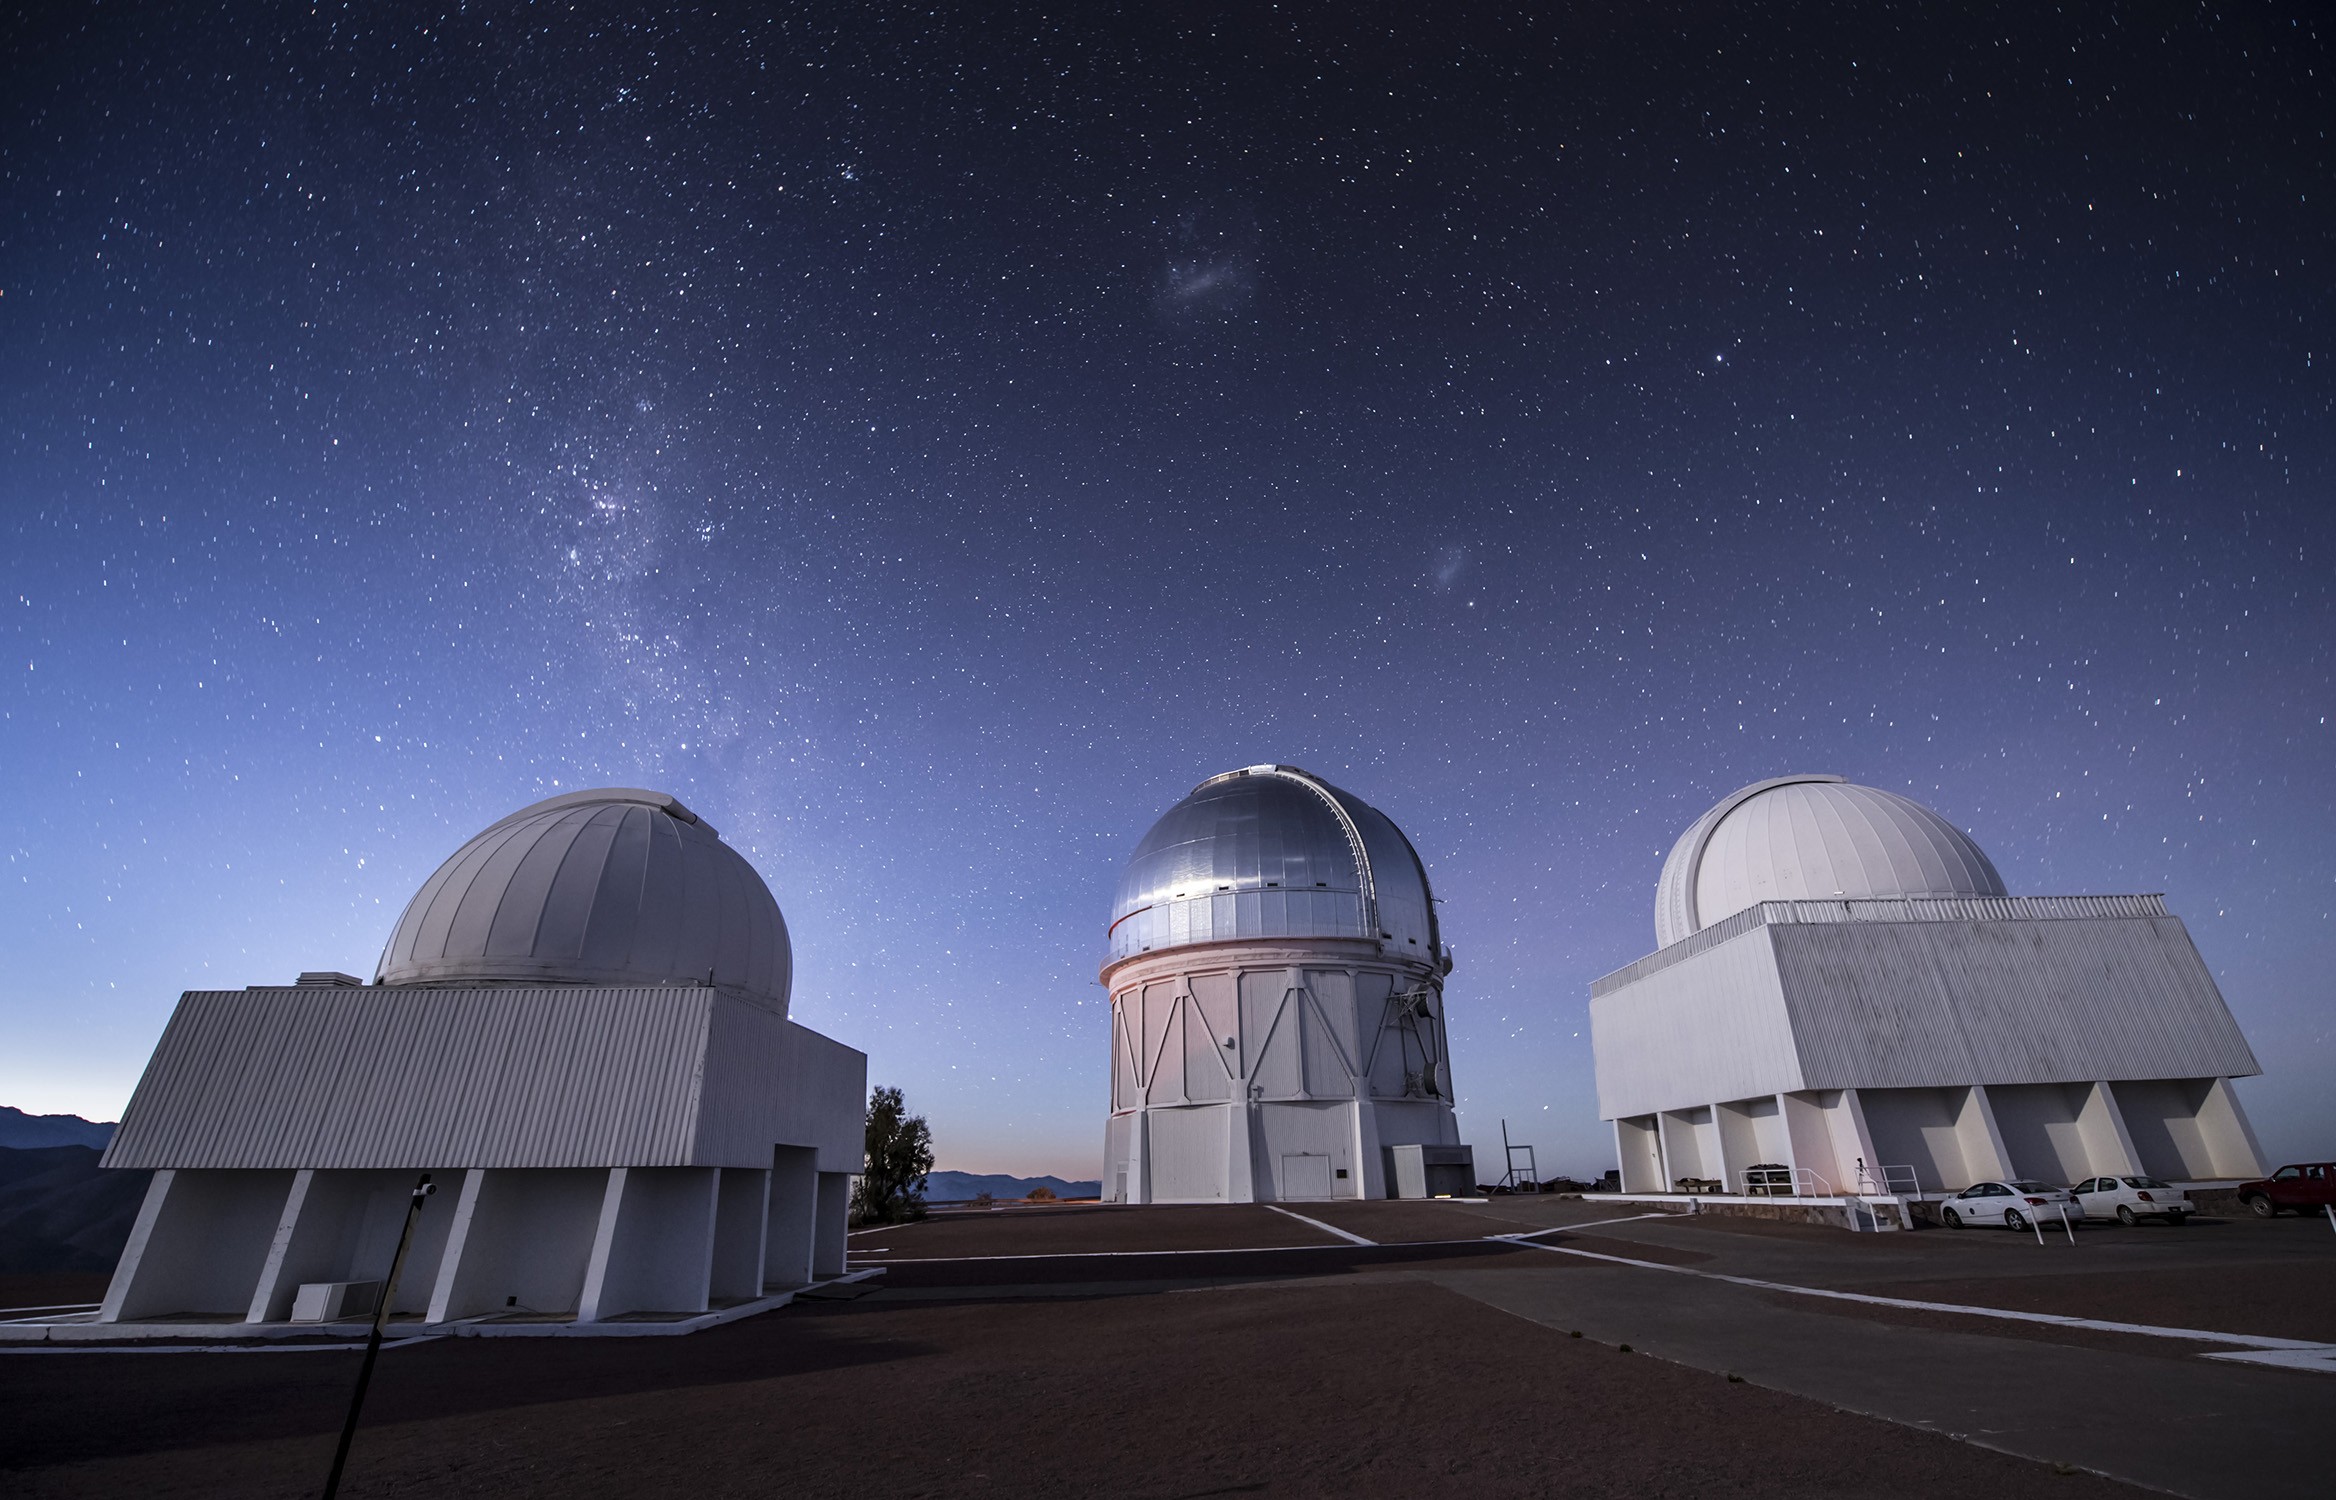 Starry skies over Cerro Tololo Inter-American Observatory in Chile and the 4-meter Victor M. Blano Telescope (center), home to the 570-megapixel Dark Energy Camera and unprecedented discovery potential for astronomers at Texas A&M University and around the world as members of the Dark Energy Survey. (Credit: Fermilab.)